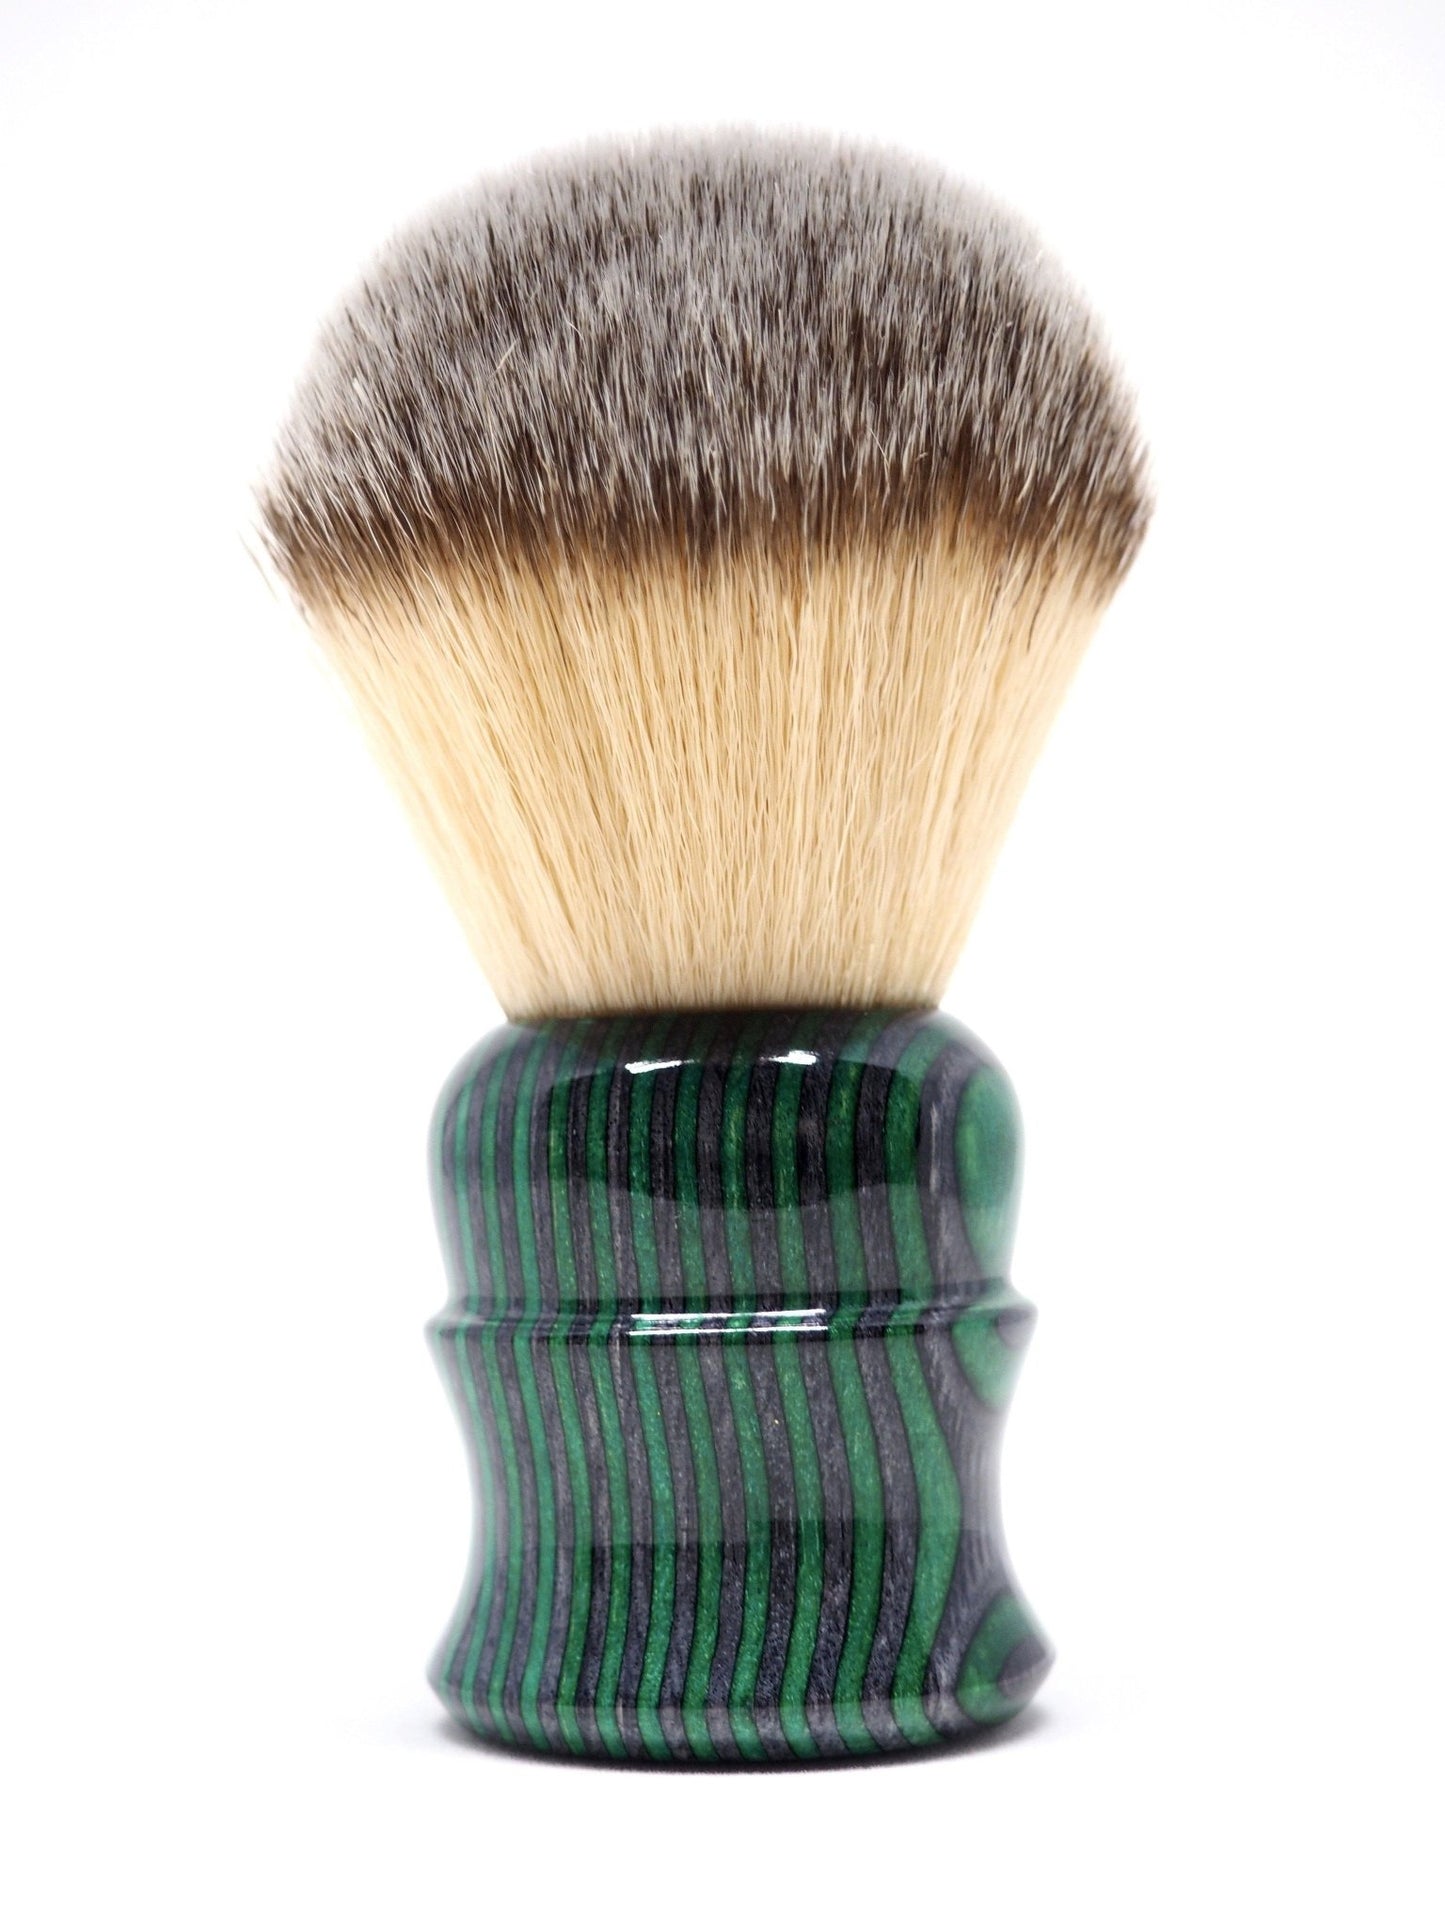 Royal Fortune Whaler Shaving Brush with a 28mm Badger hair knot - Black Ship Grooming Co.